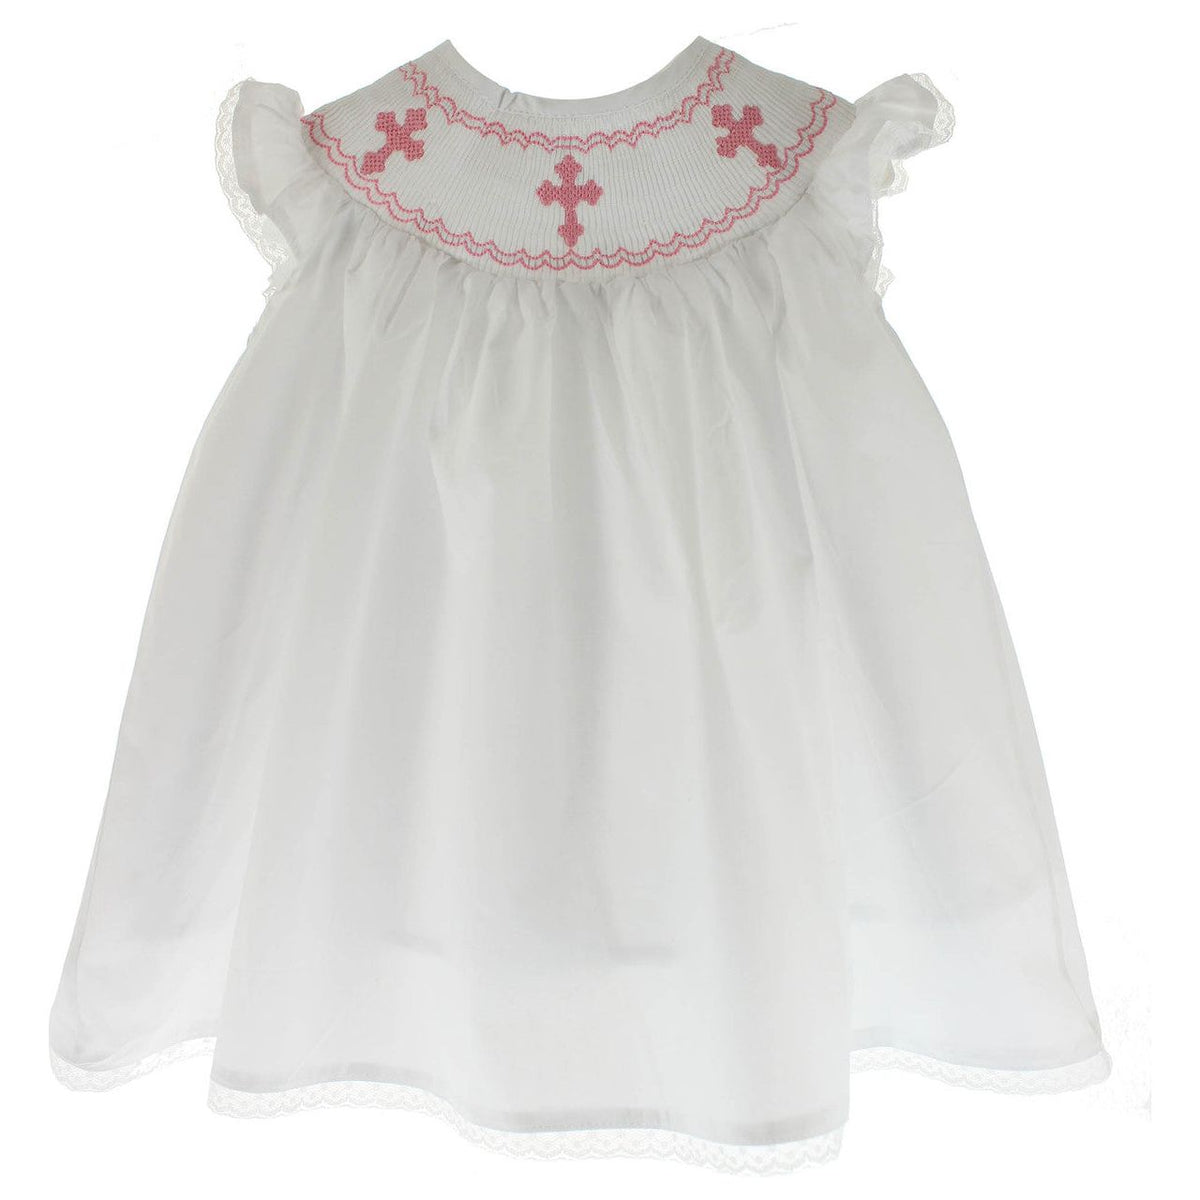 Girls White Dress Pink Smocked Crosses Christening Outfit